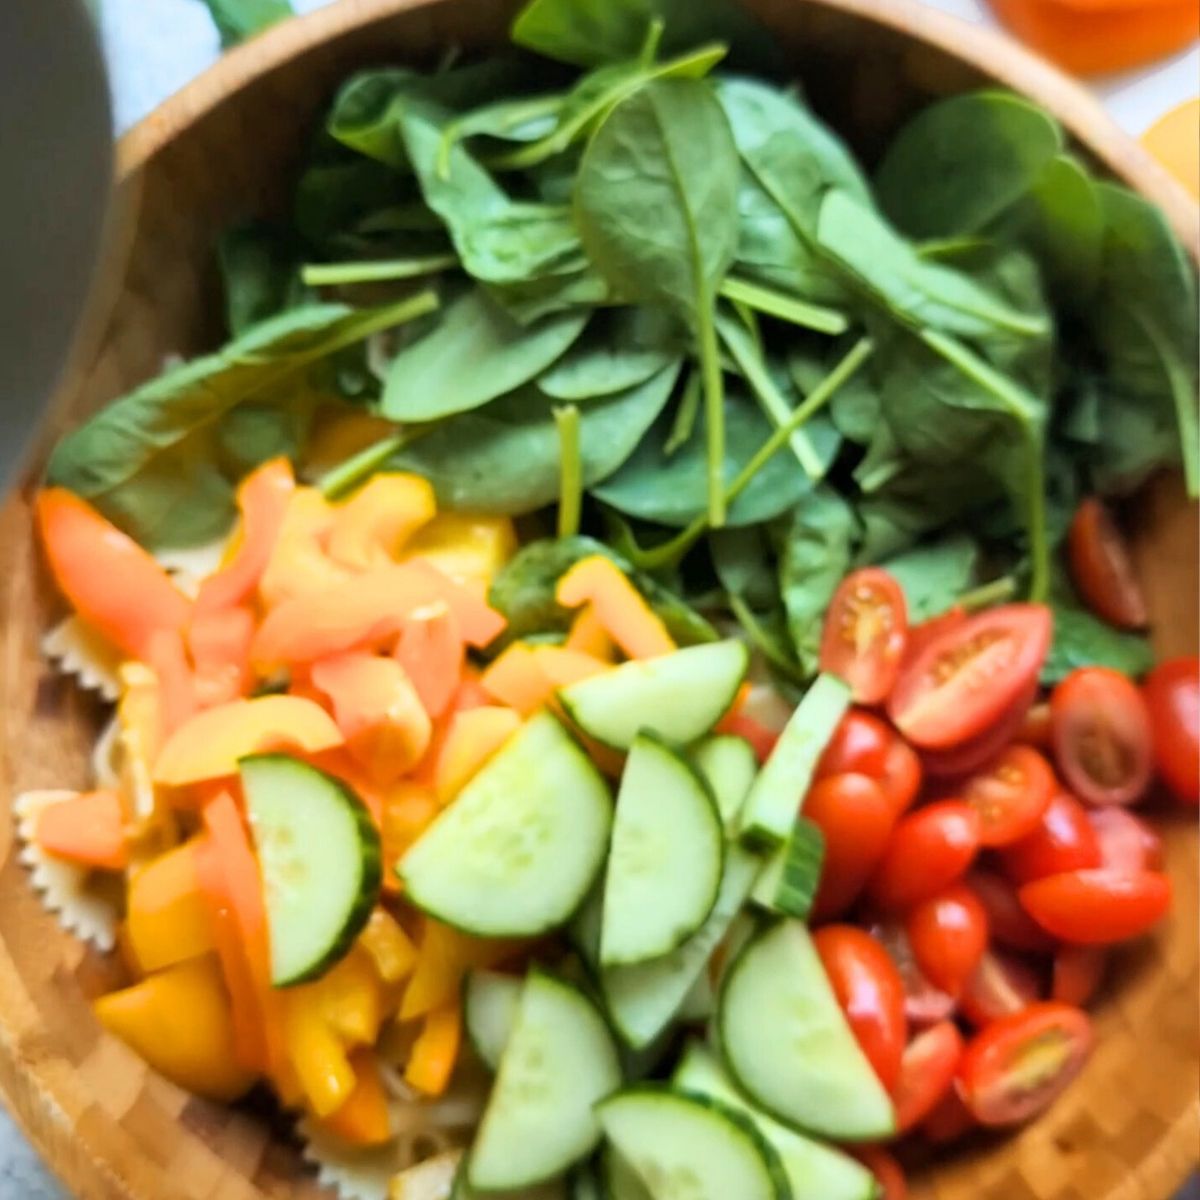 a large bowl with pasta, cucumbers, tomatoes, spinach, and bell peppers for a vegetarian pasta salad.